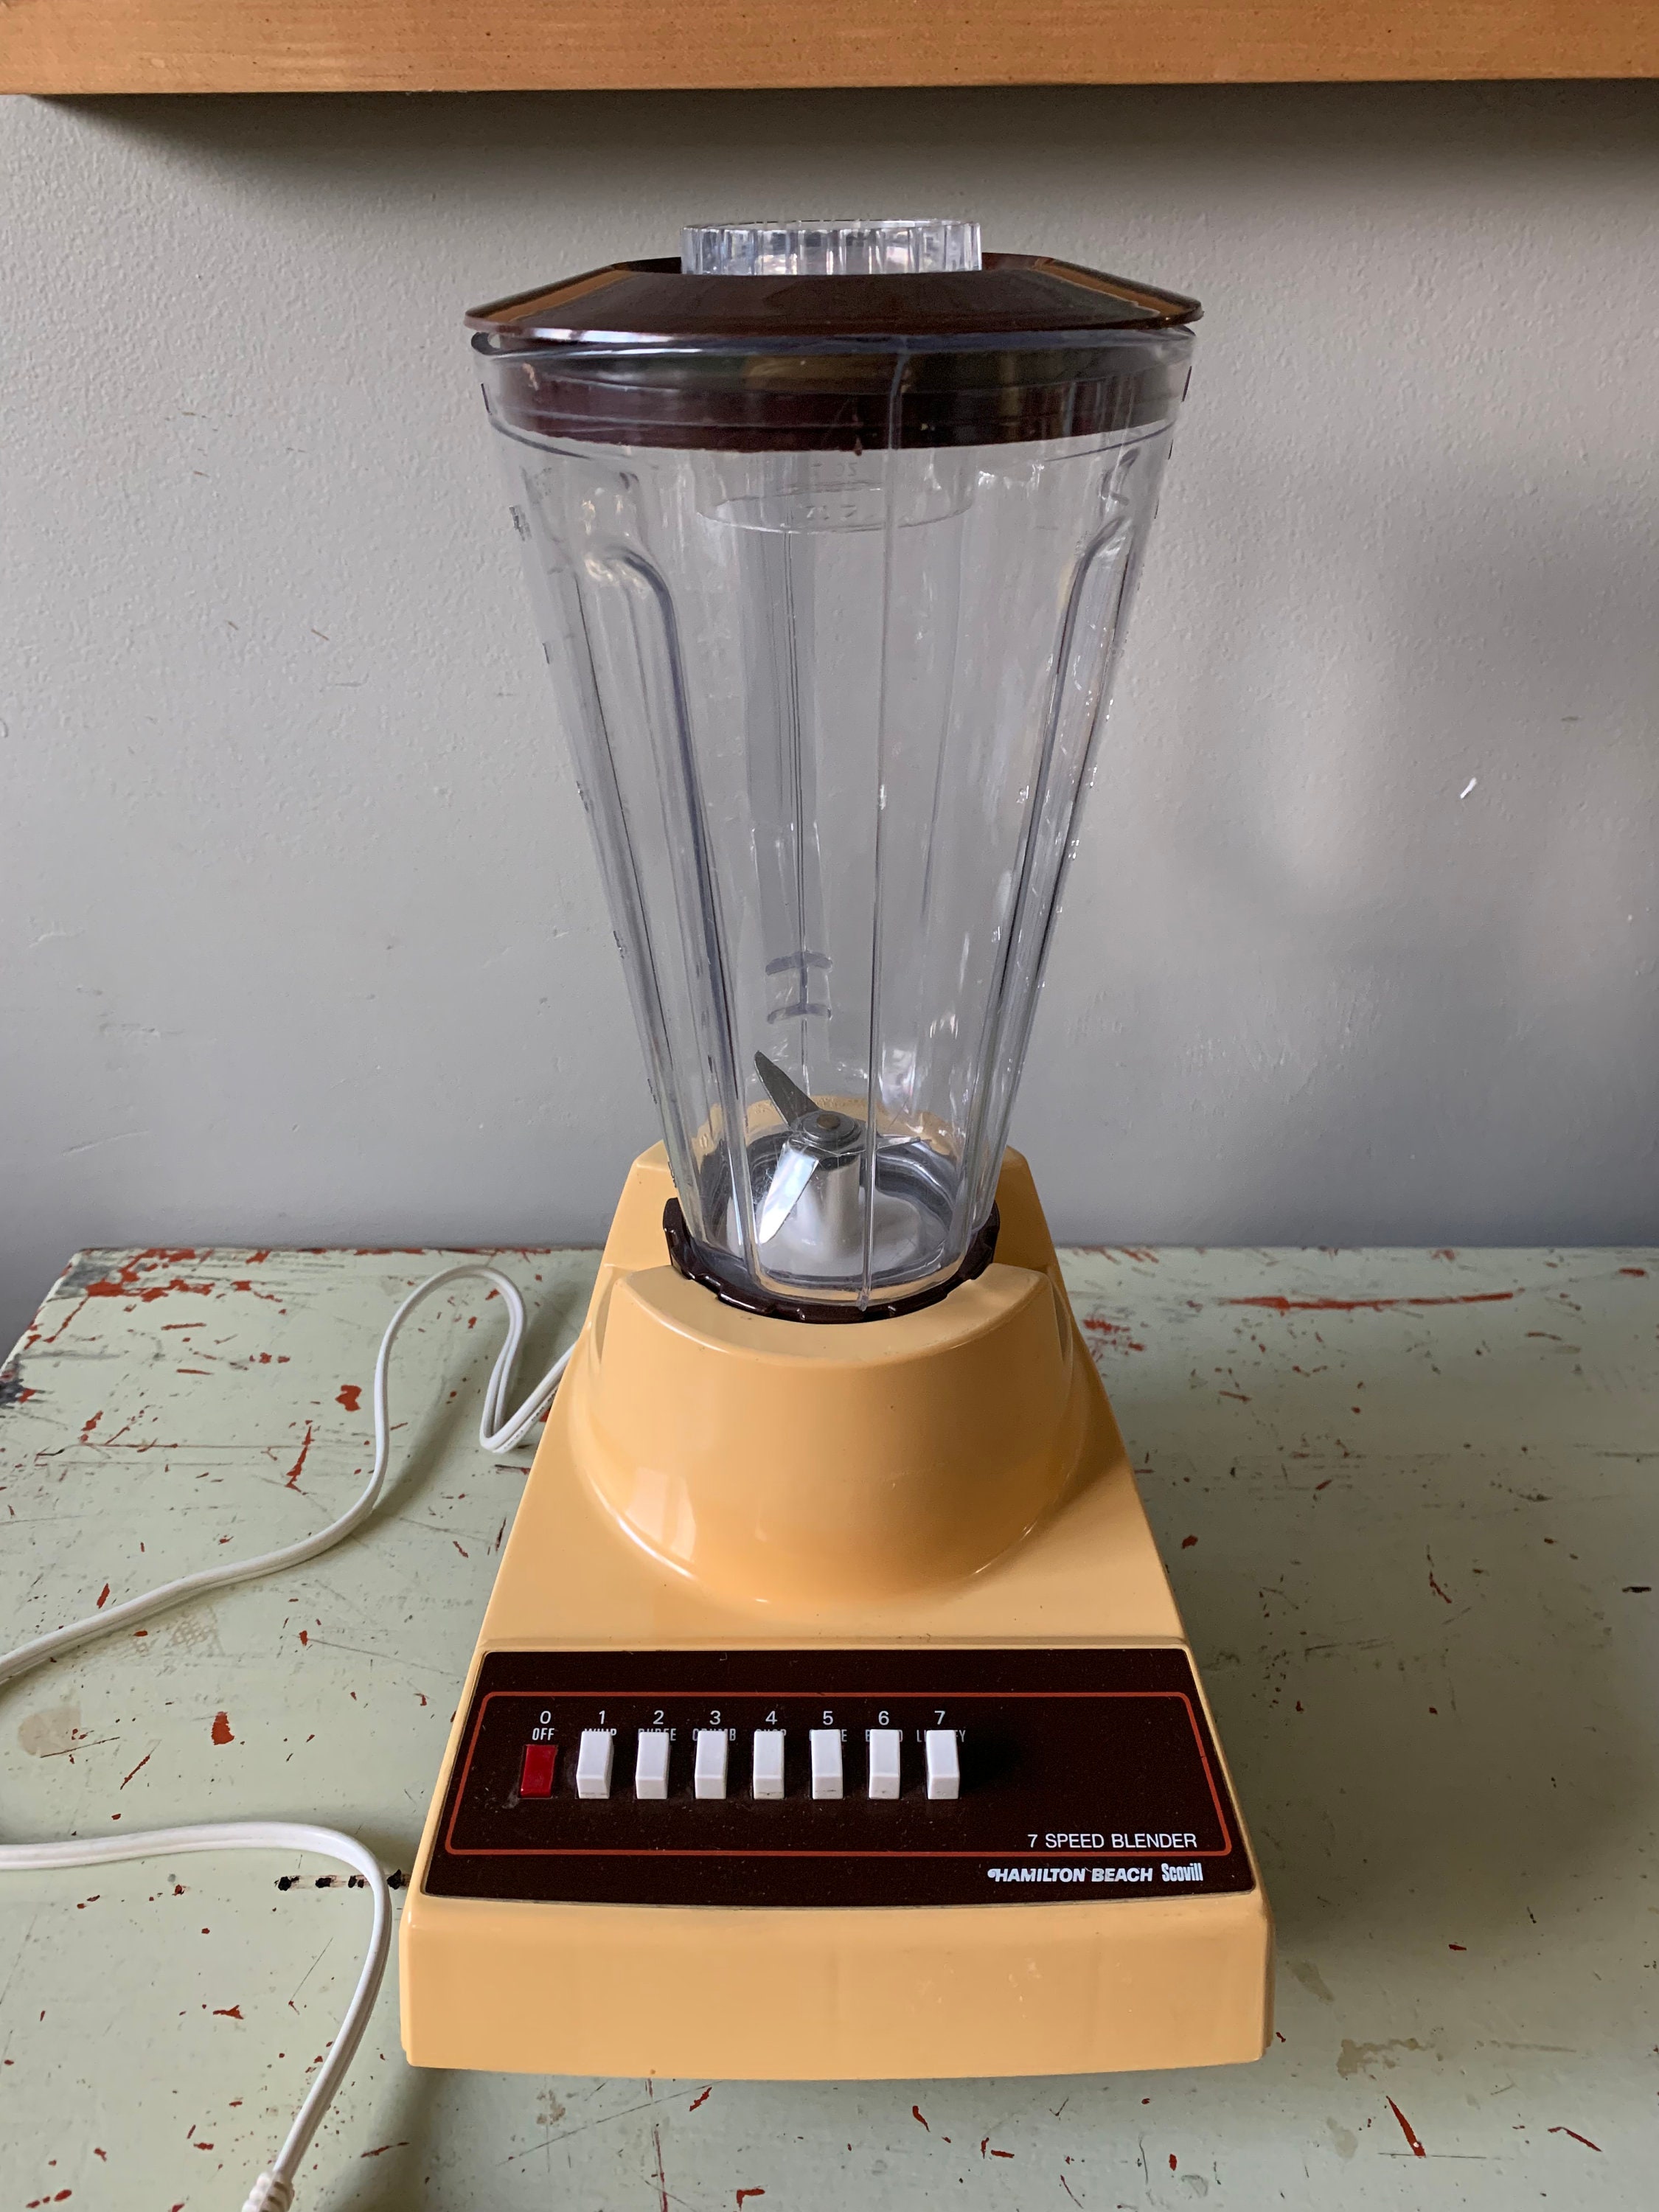 My first vintage kitchen gadget; a Hamilton beach blender, model 585-2.  Still works and currently trying to figure out what year it is :  r/vintagekitchentoys